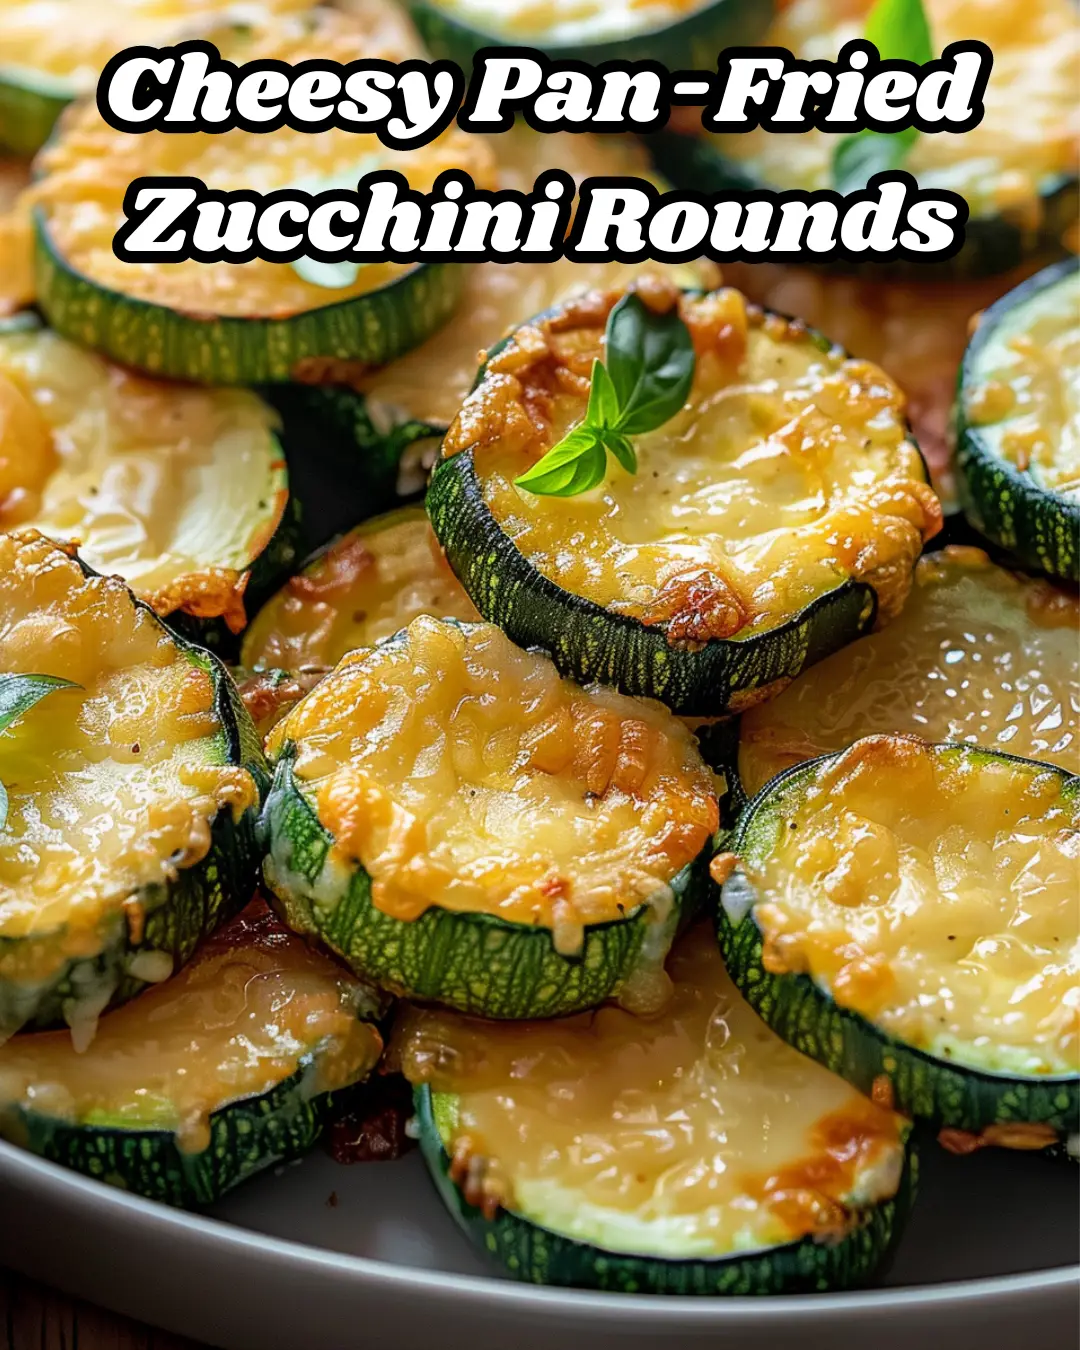 Cheesy Pan-Fried Zucchini Rounds Recipe – Foodyhealthylife